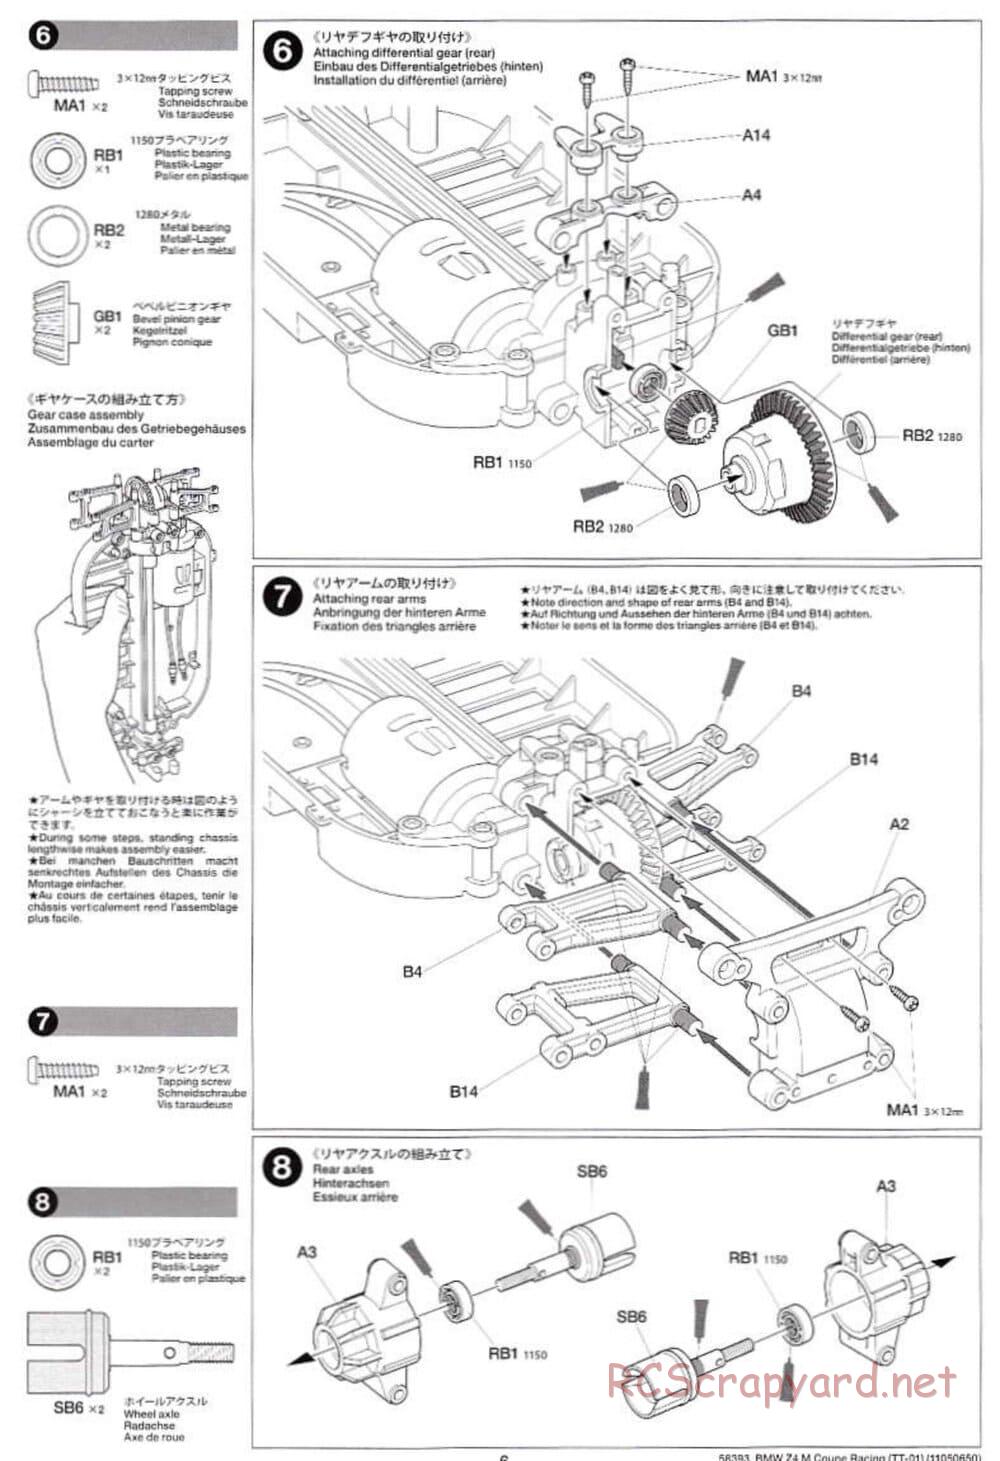 Tamiya - BMW Z4 M Coupe Racing - TT-01 Chassis - Manual - Page 6